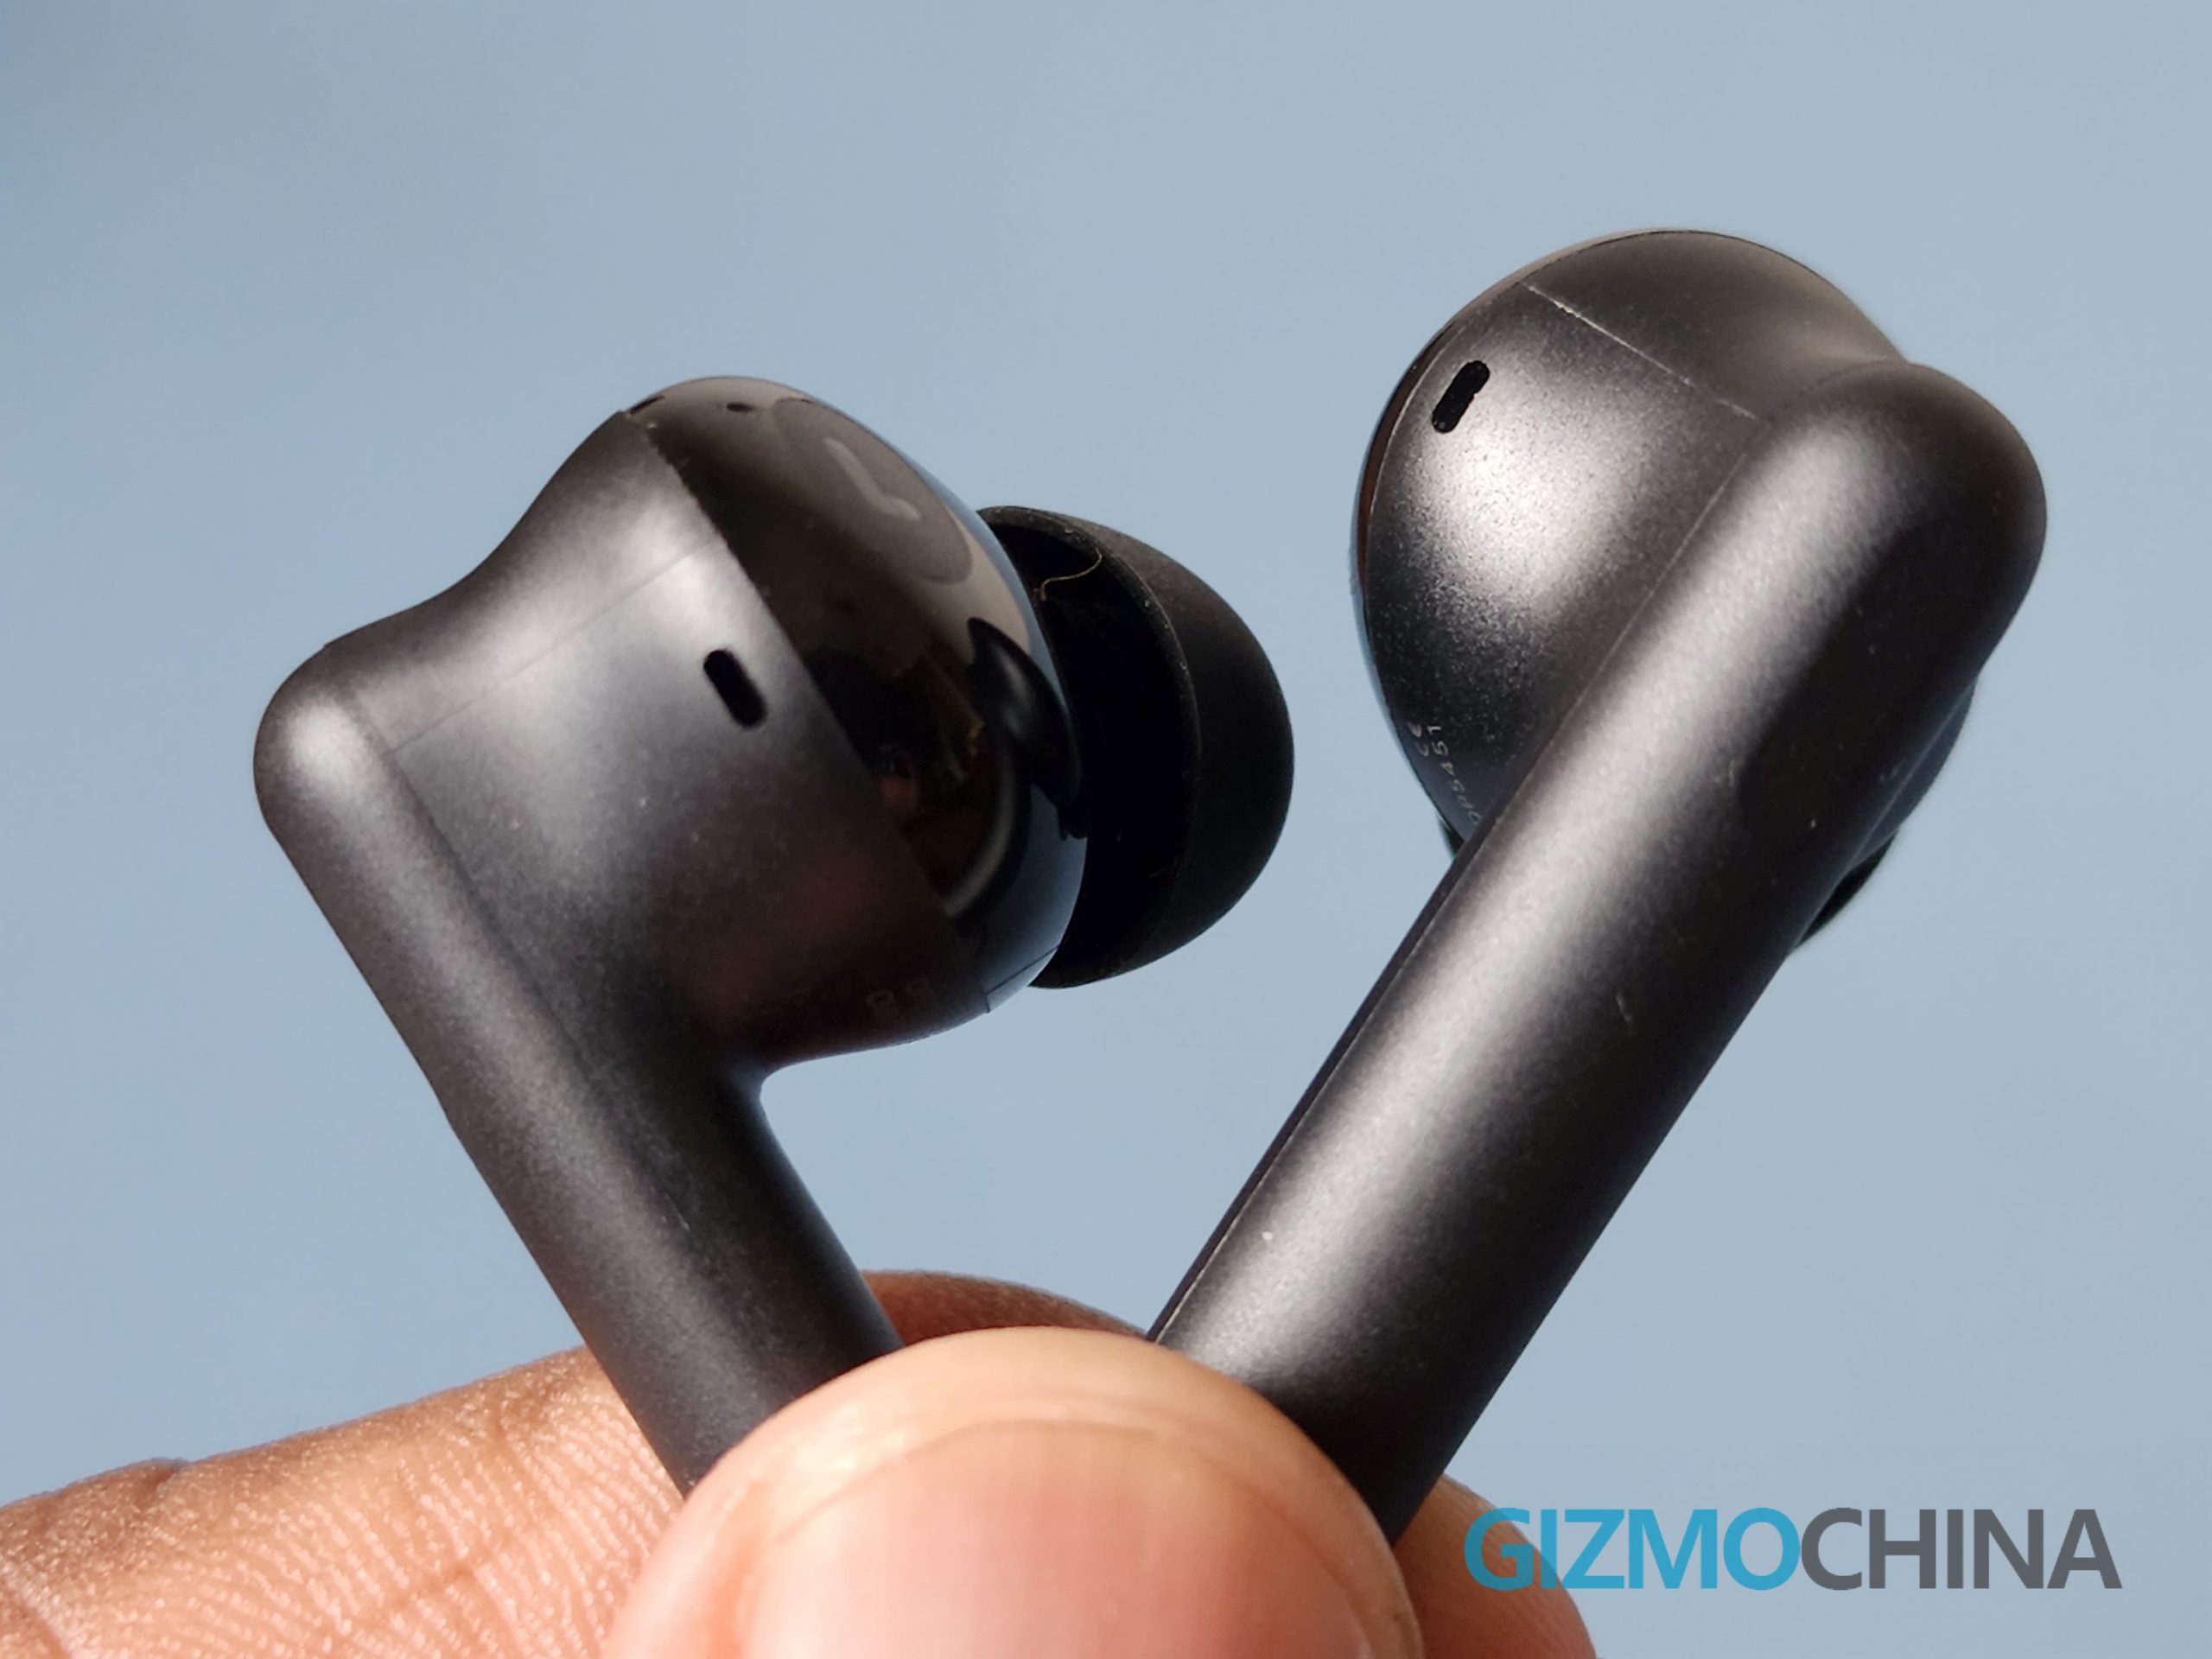 Oppo Enco Buds 2 Review: Good for the Price